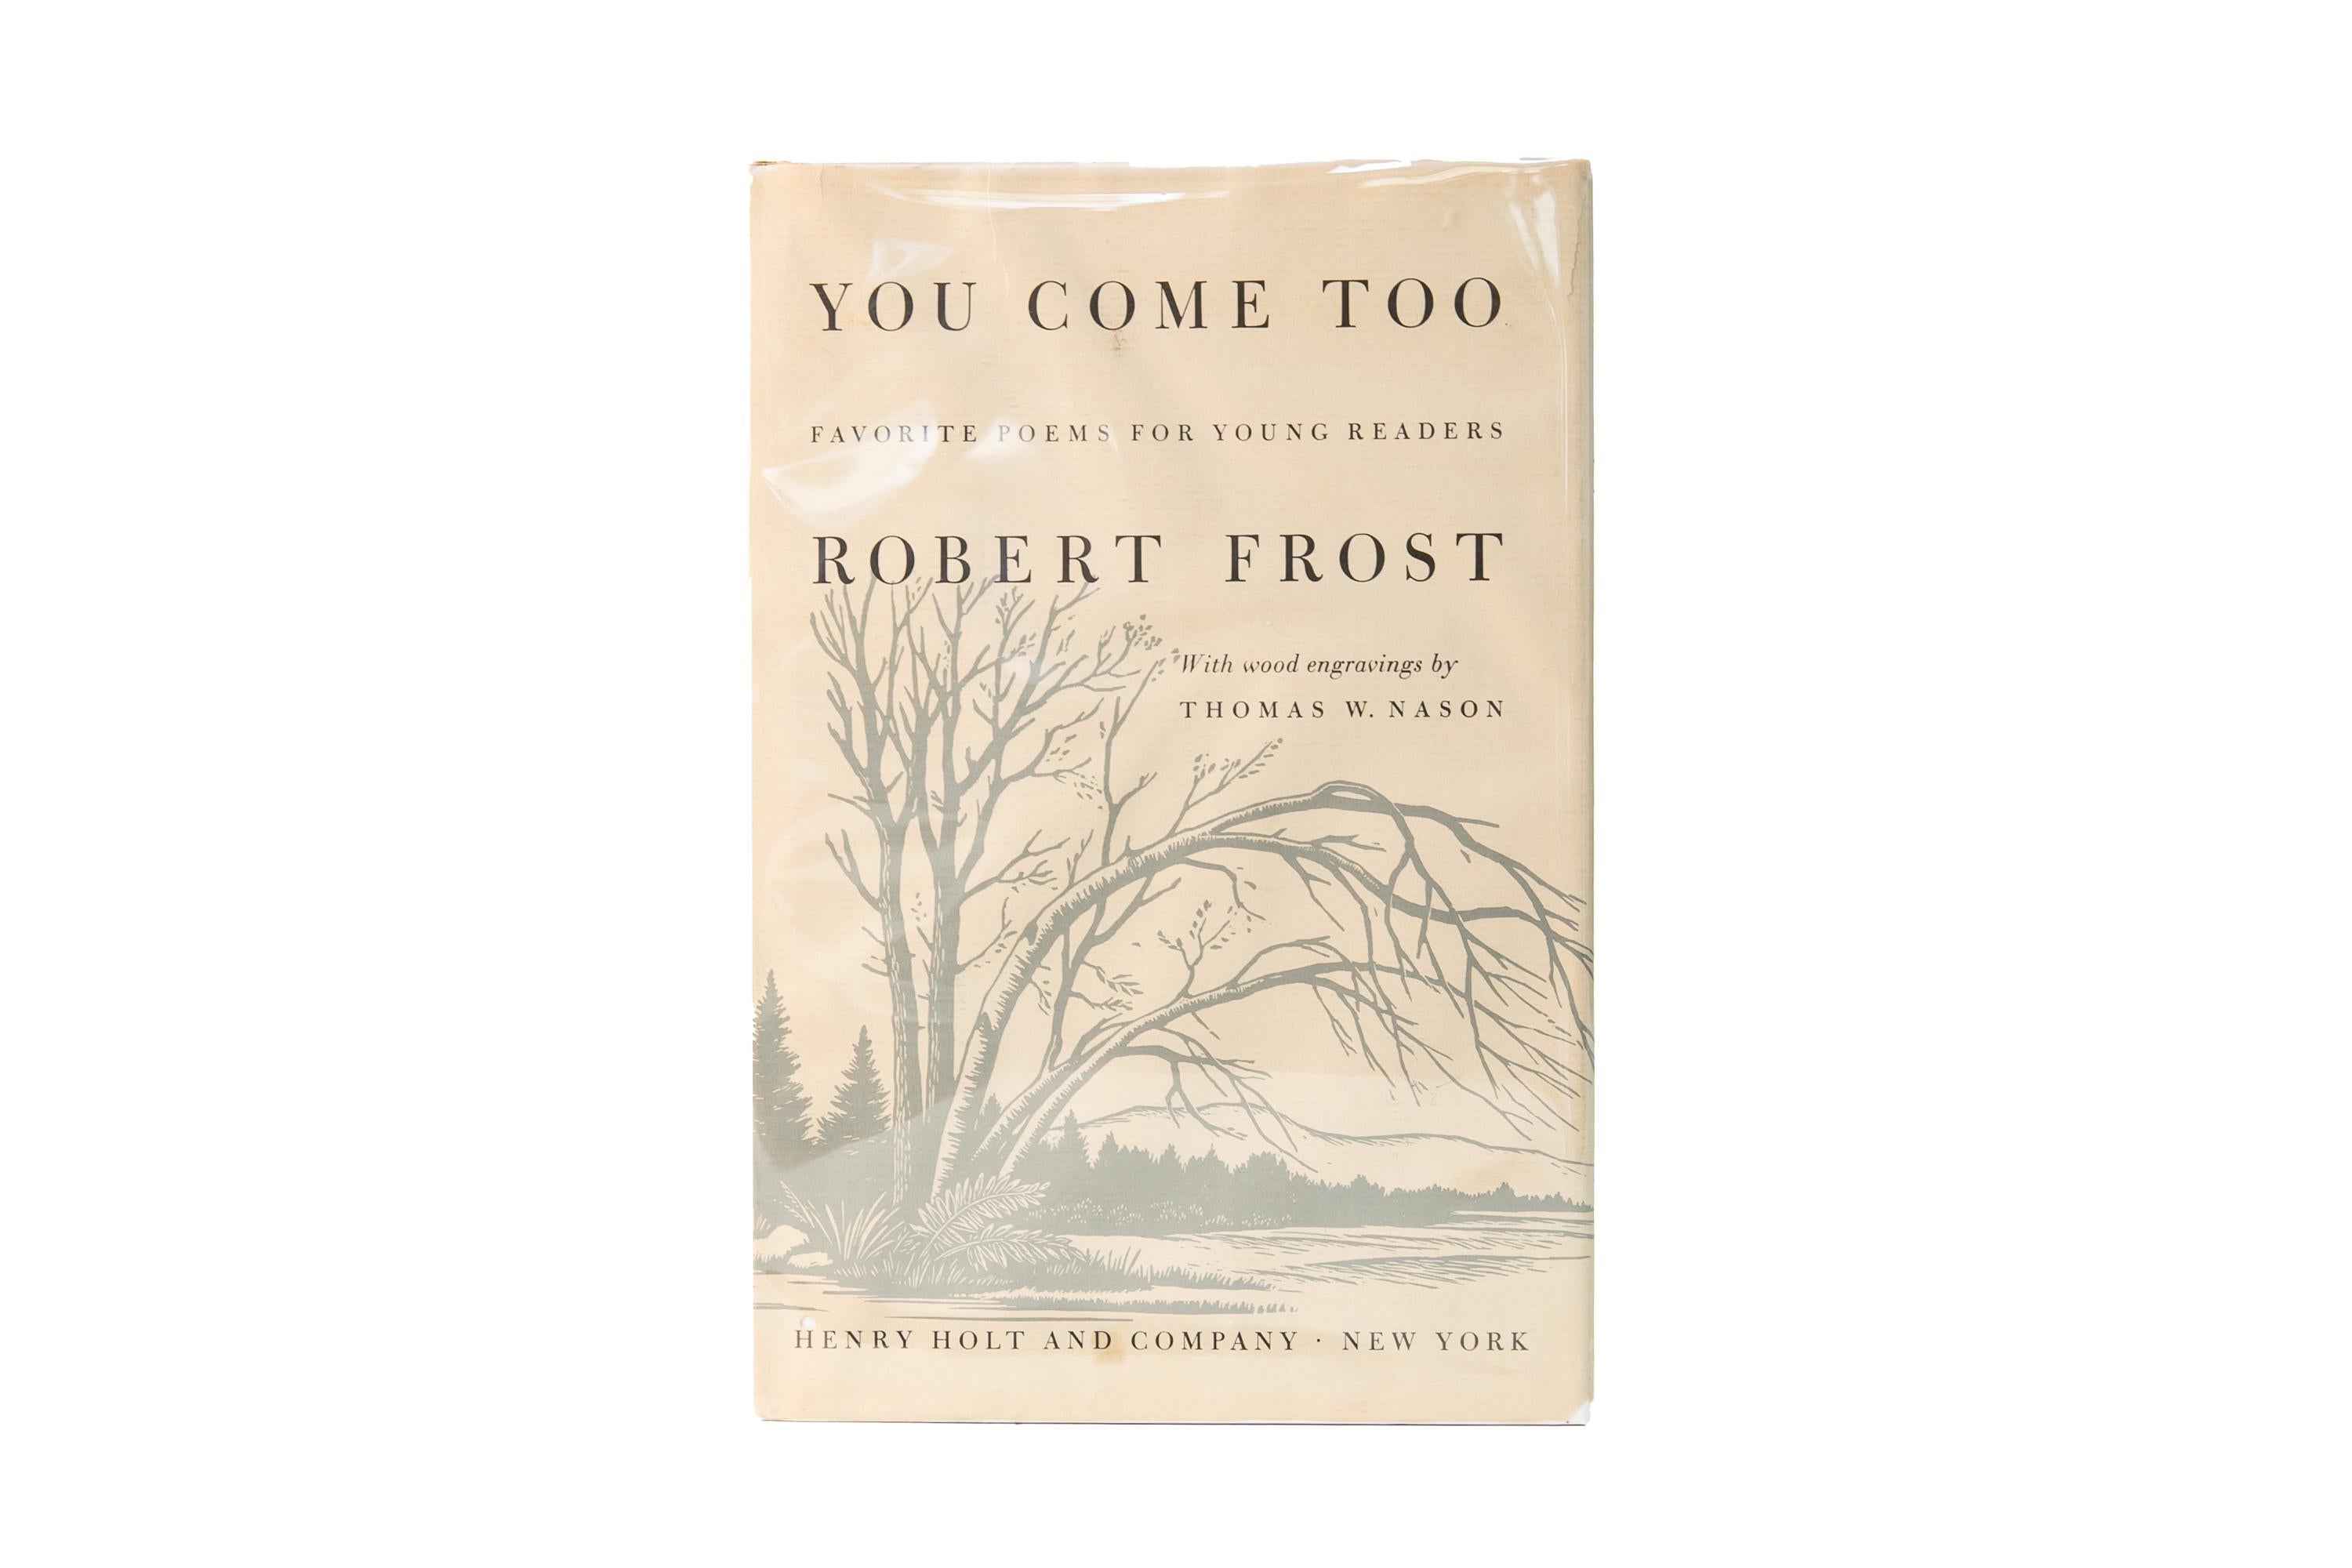 American 1 Volume. Robert Frost, You Come Too. For Sale